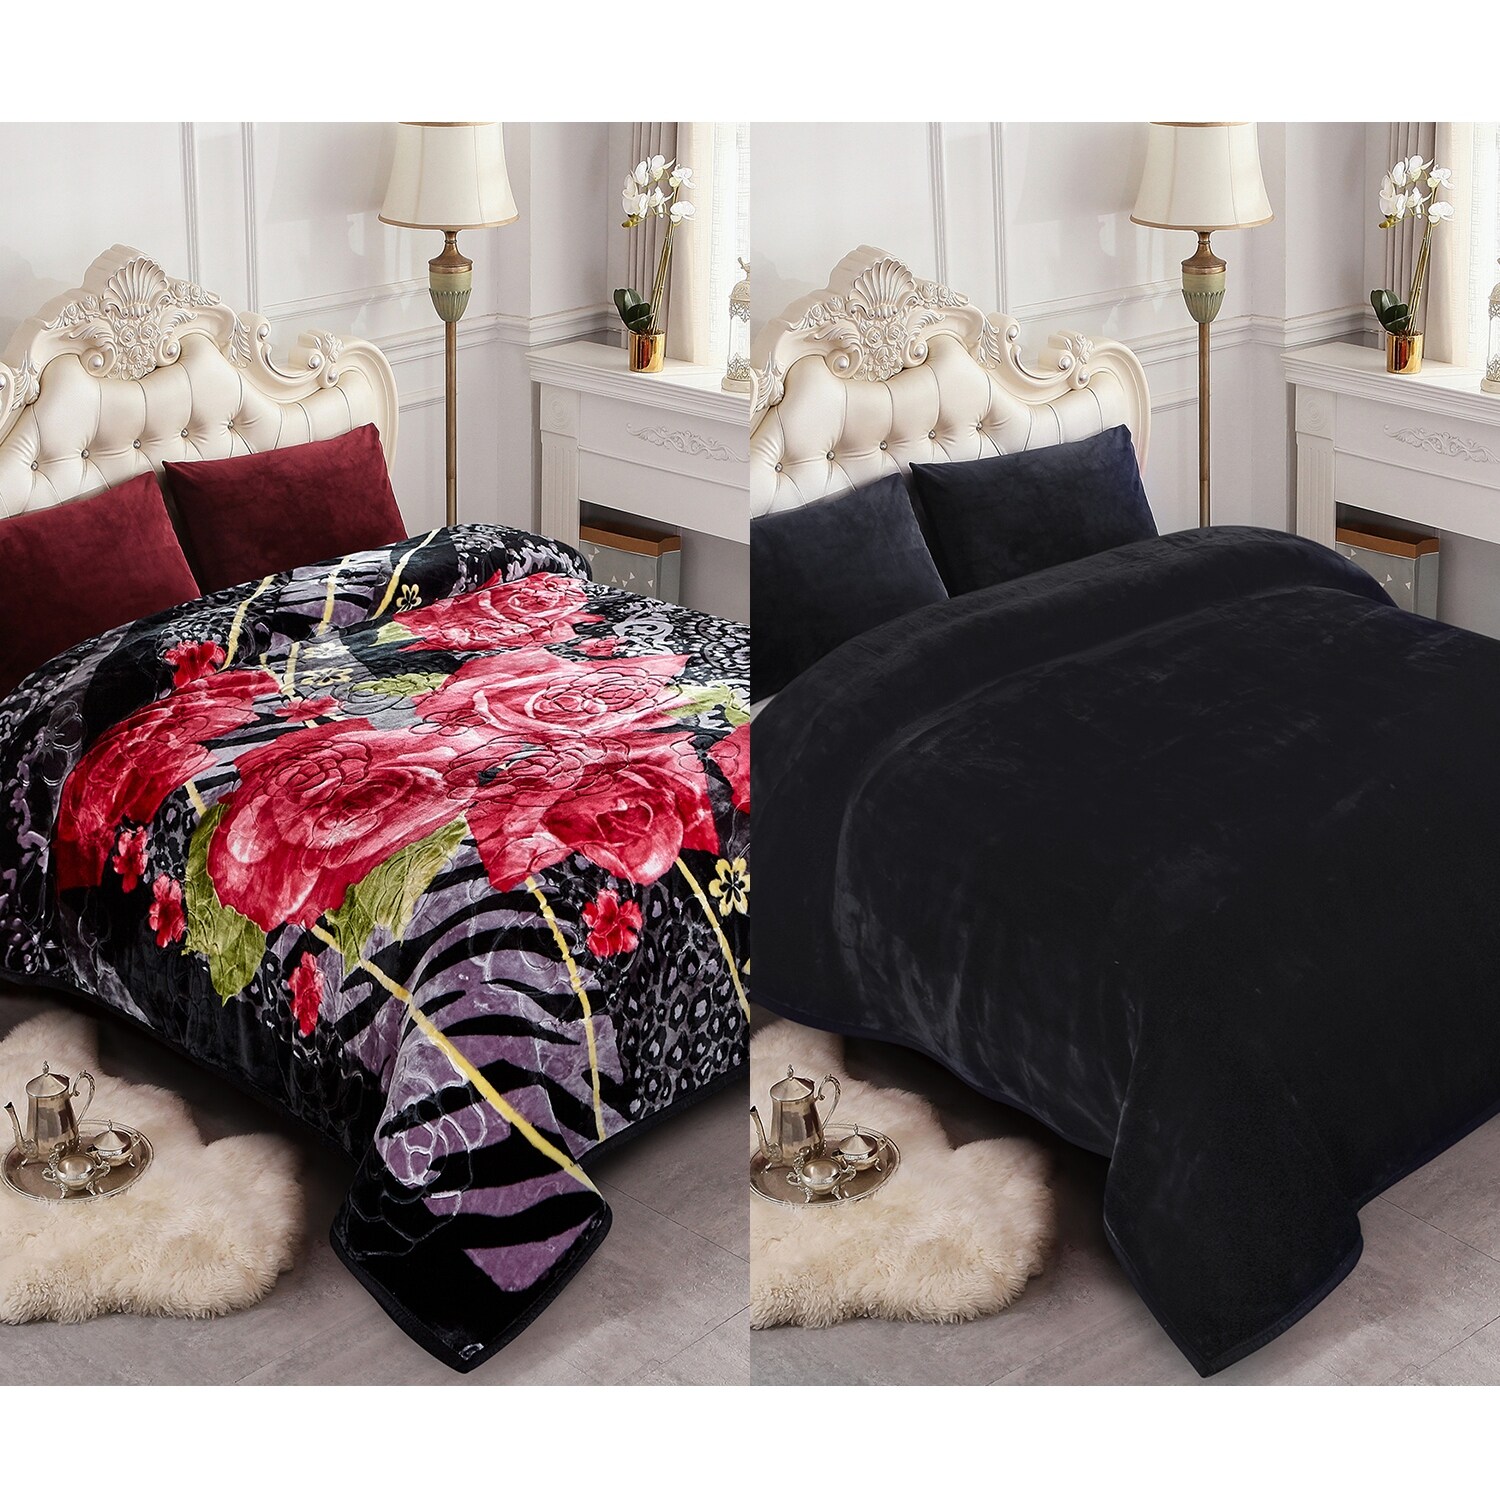 High-end Tuscan Imitation Fur Blanket for Winter Warm Blankets for Beds  High-grade Cozy Plush